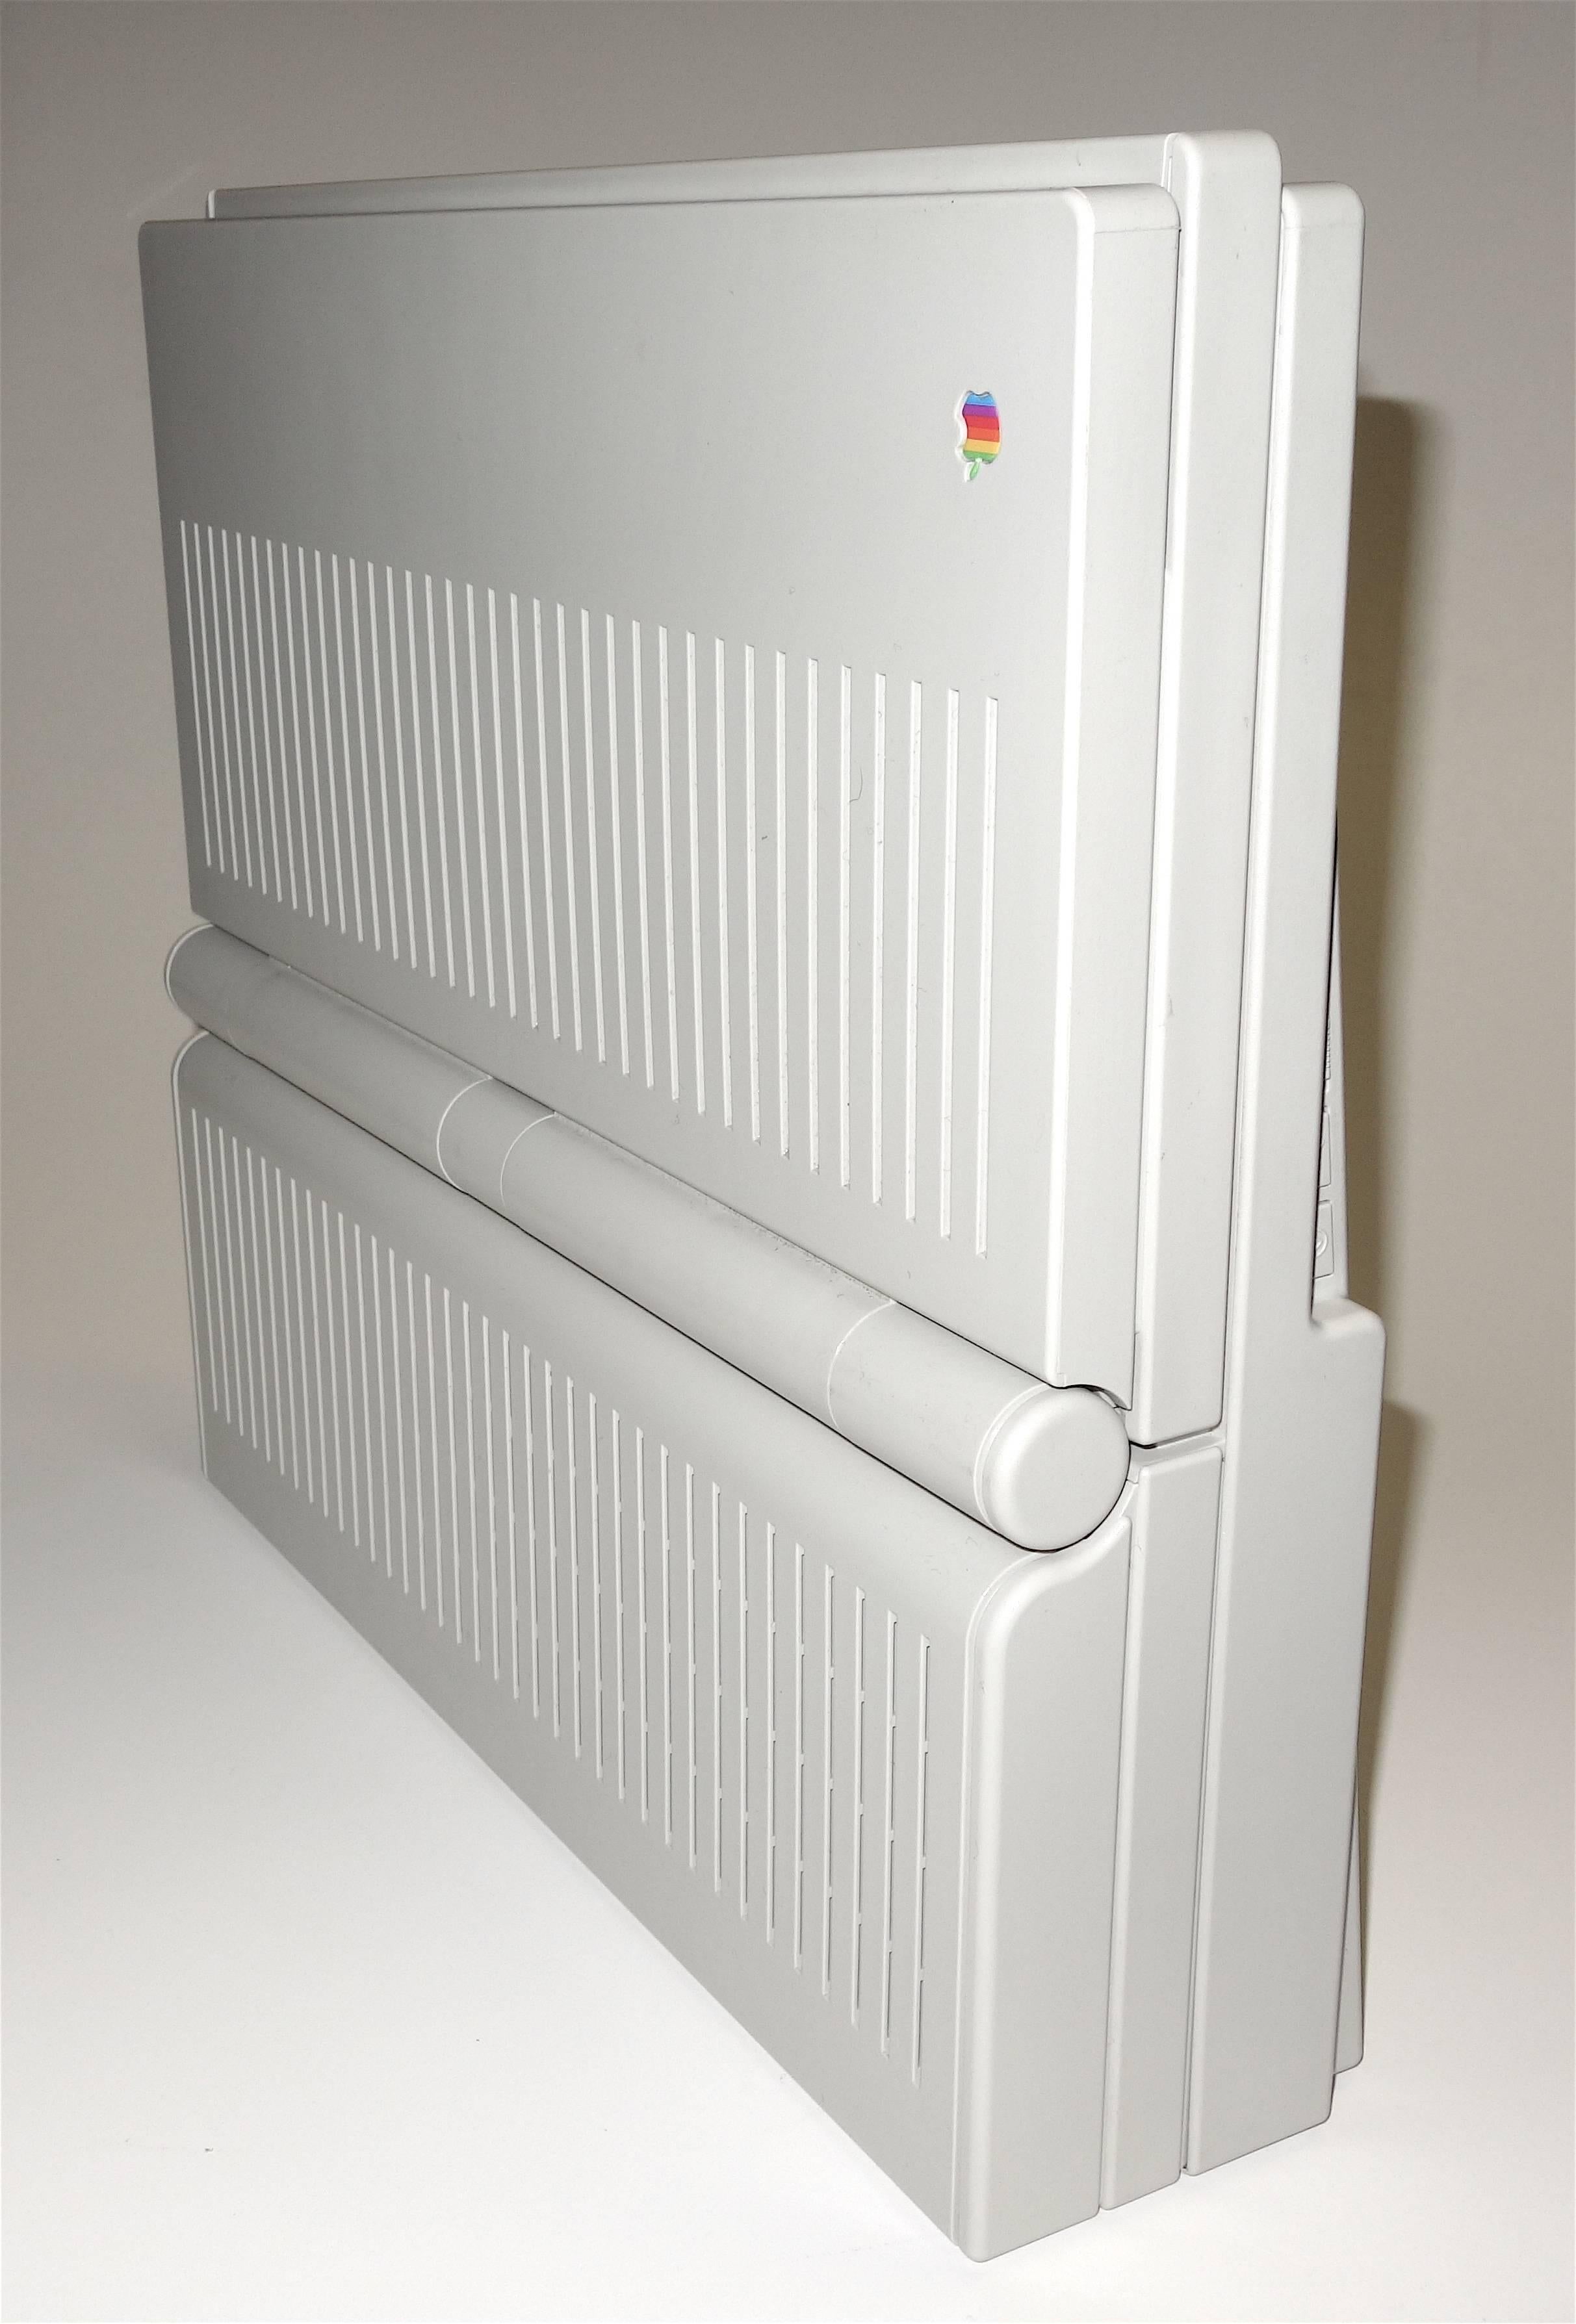 First Macintosh Portable Computer, As New, Vintage Iconic RARE Steve Jobs Design For Sale 1